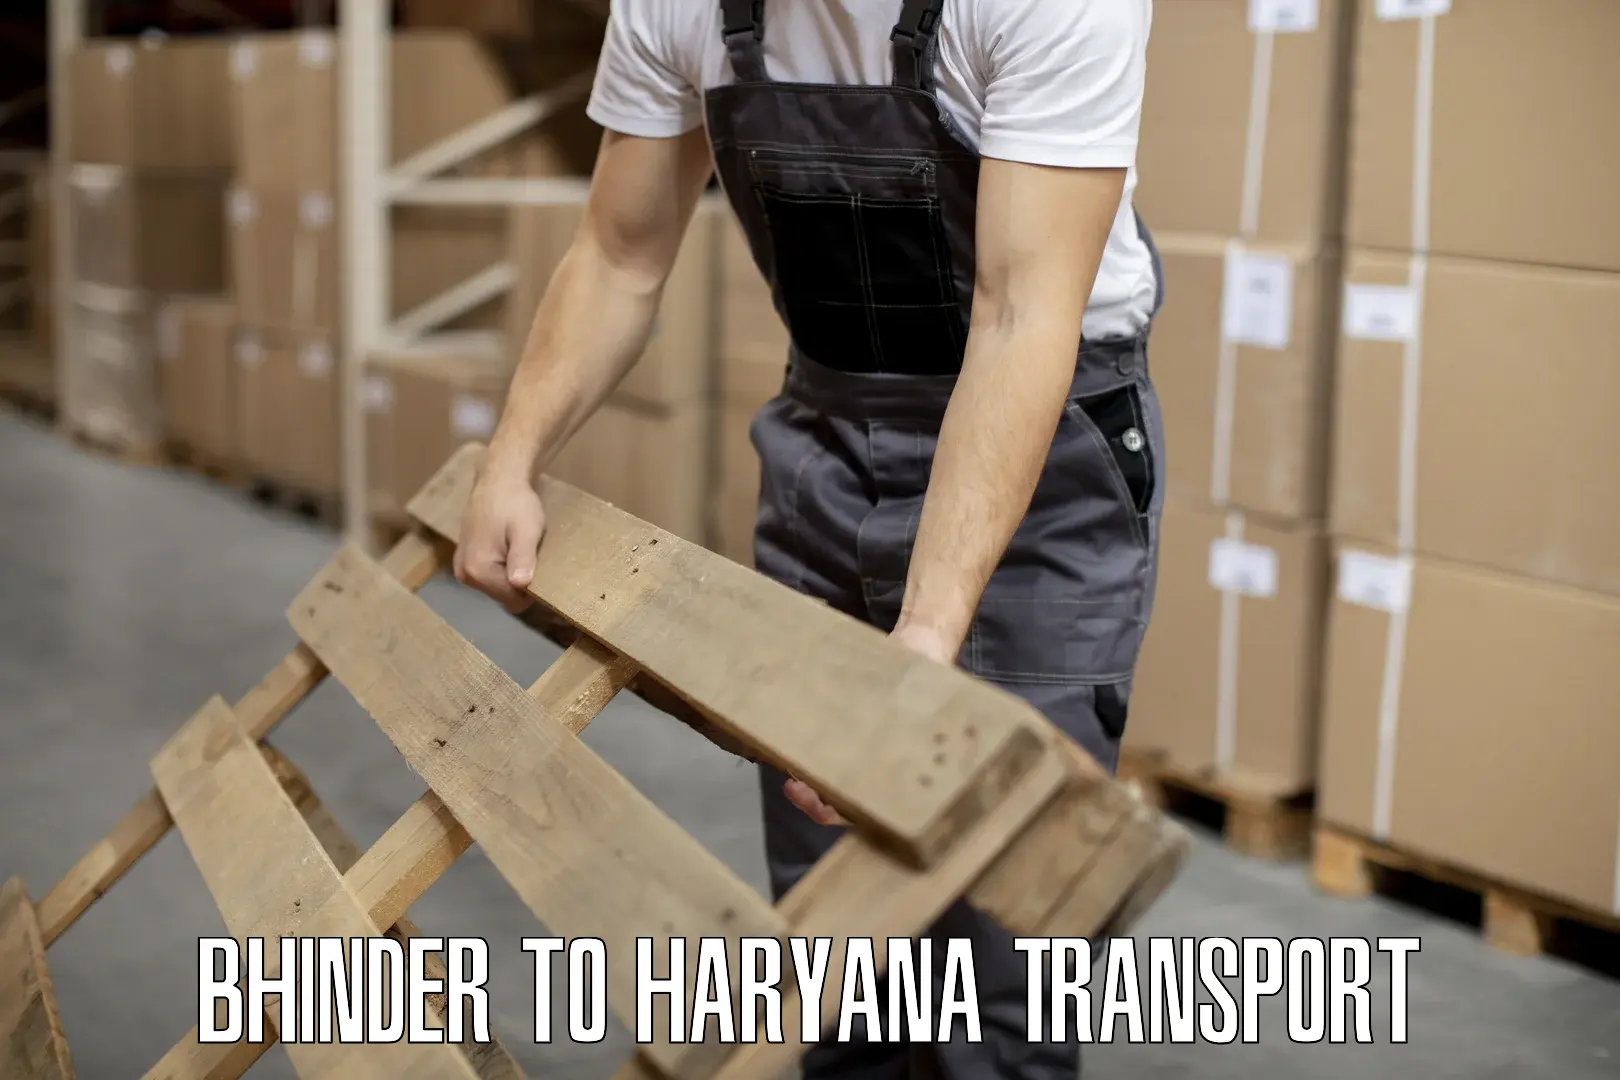 Delivery service Bhinder to Haryana